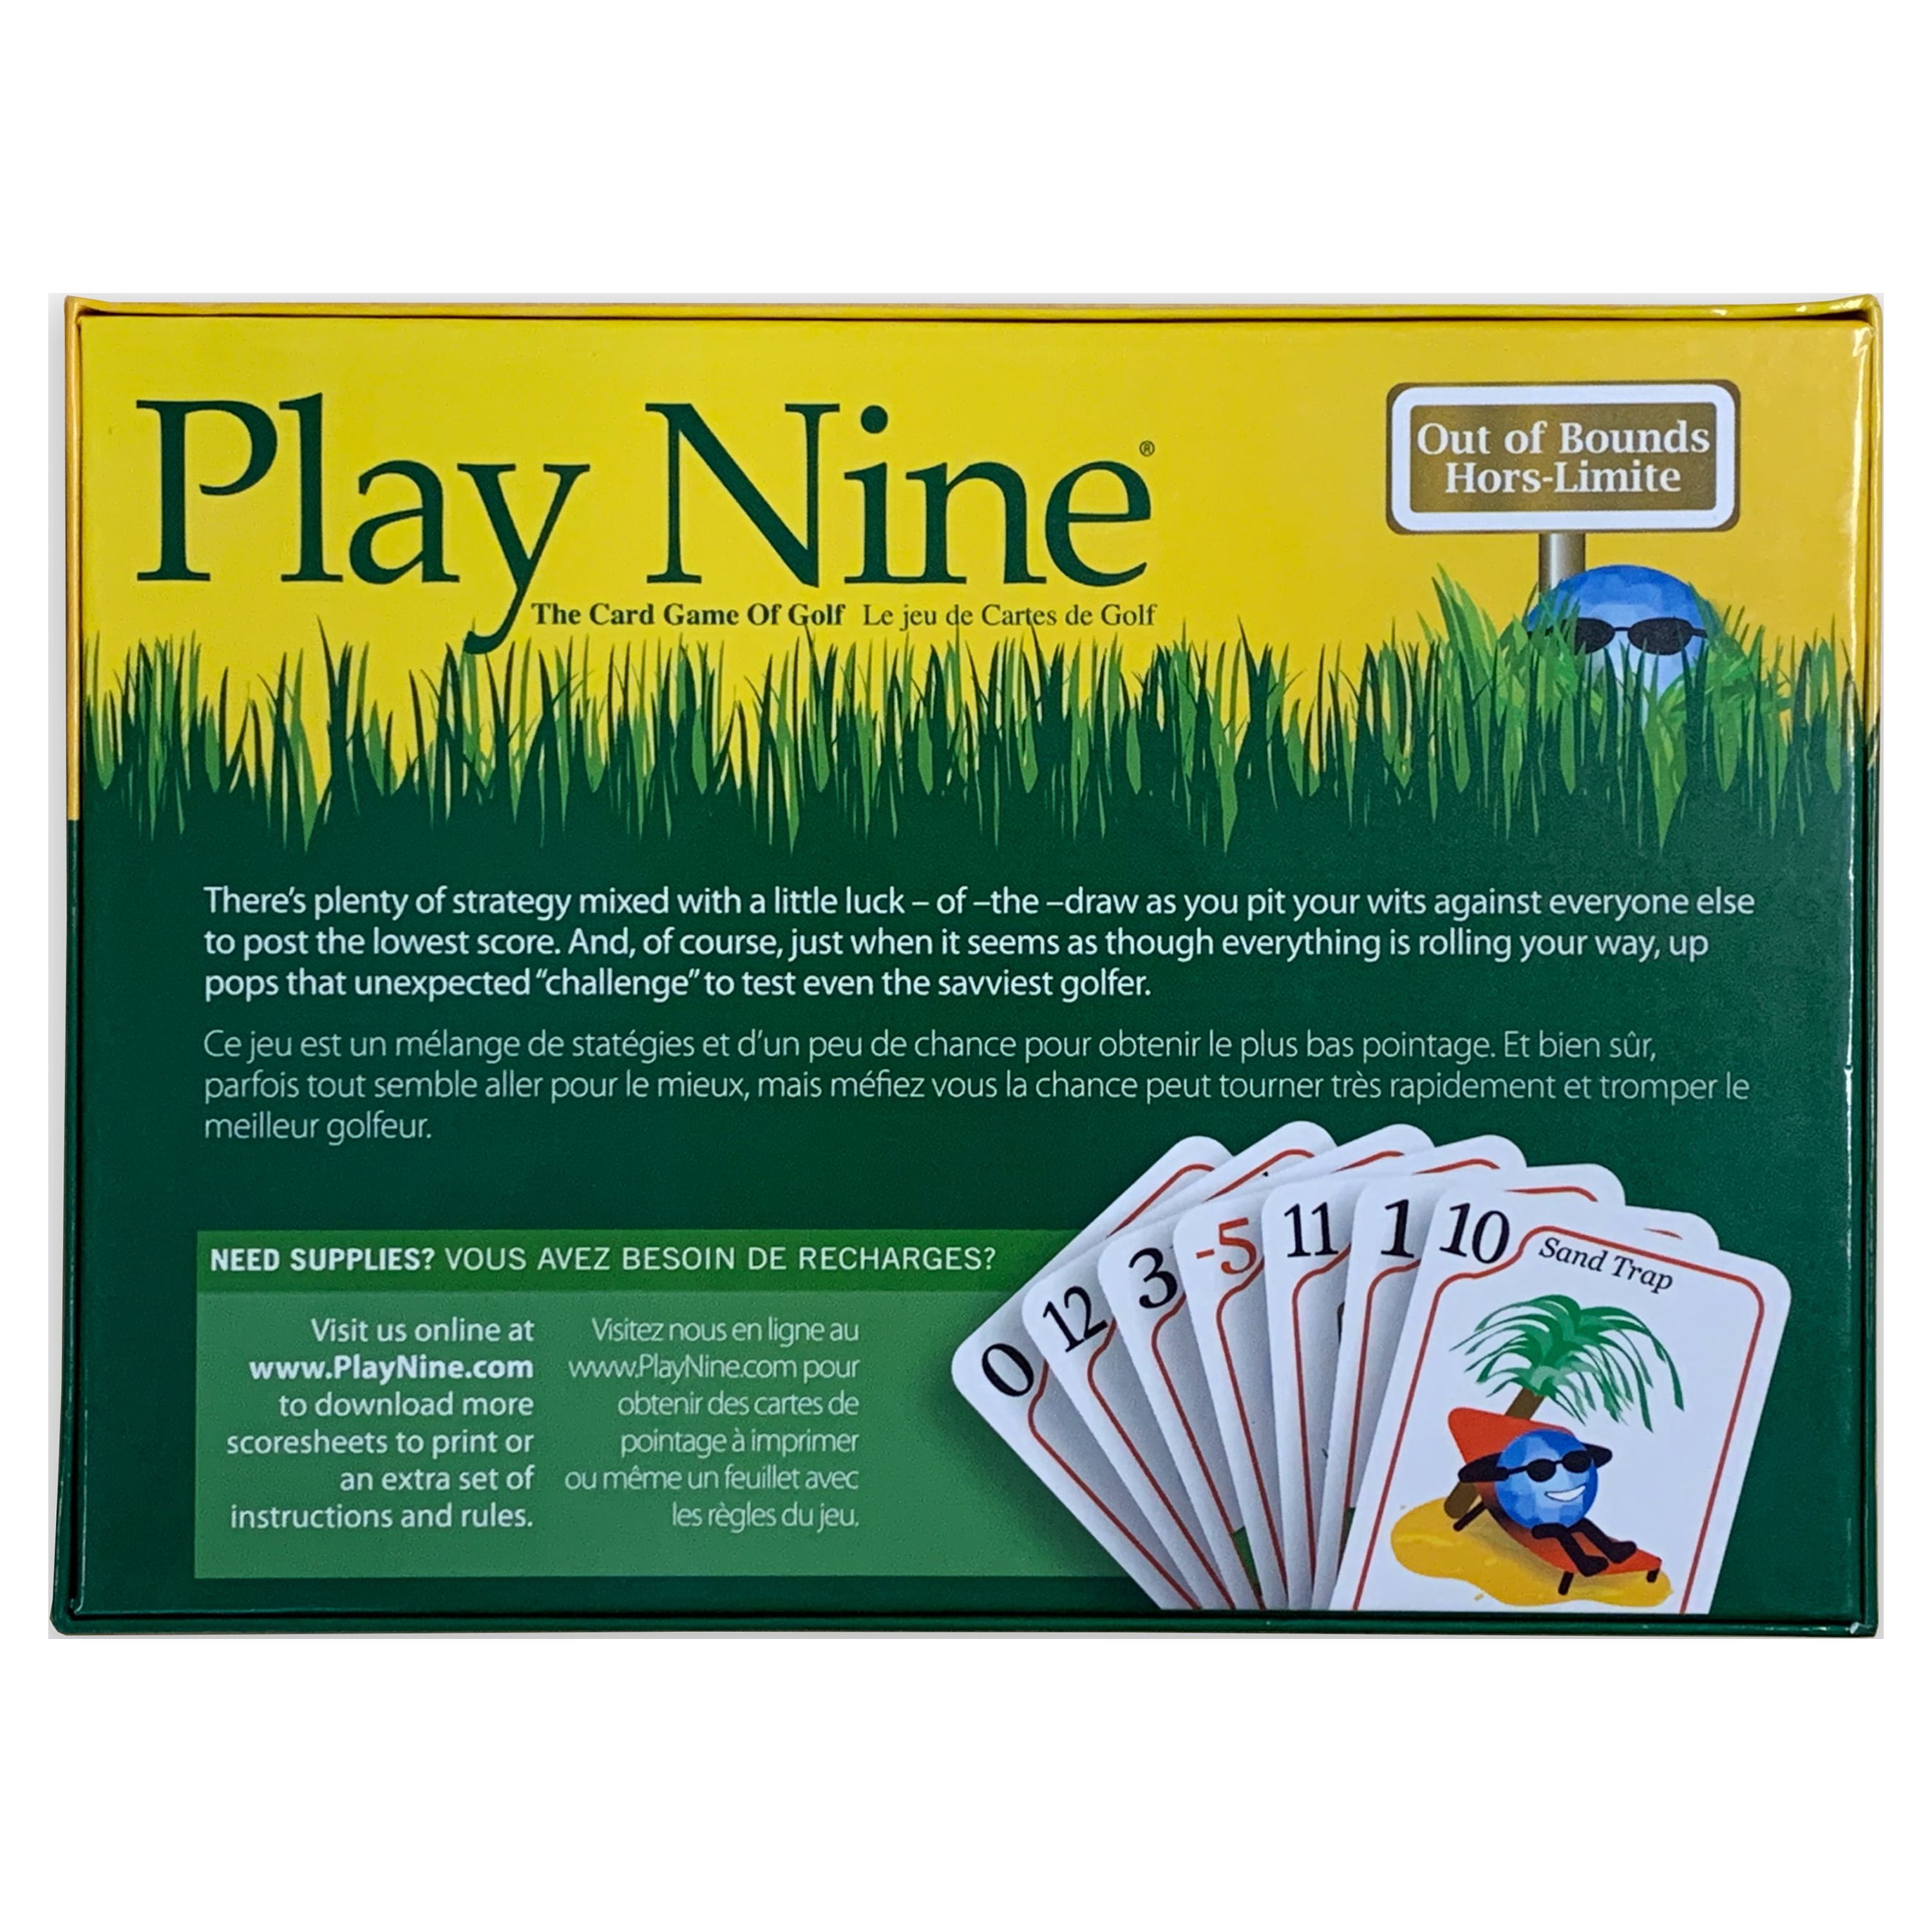 Play Nine The Card Game of Golf New in Box Sealed Great family fun - image 2 of 8